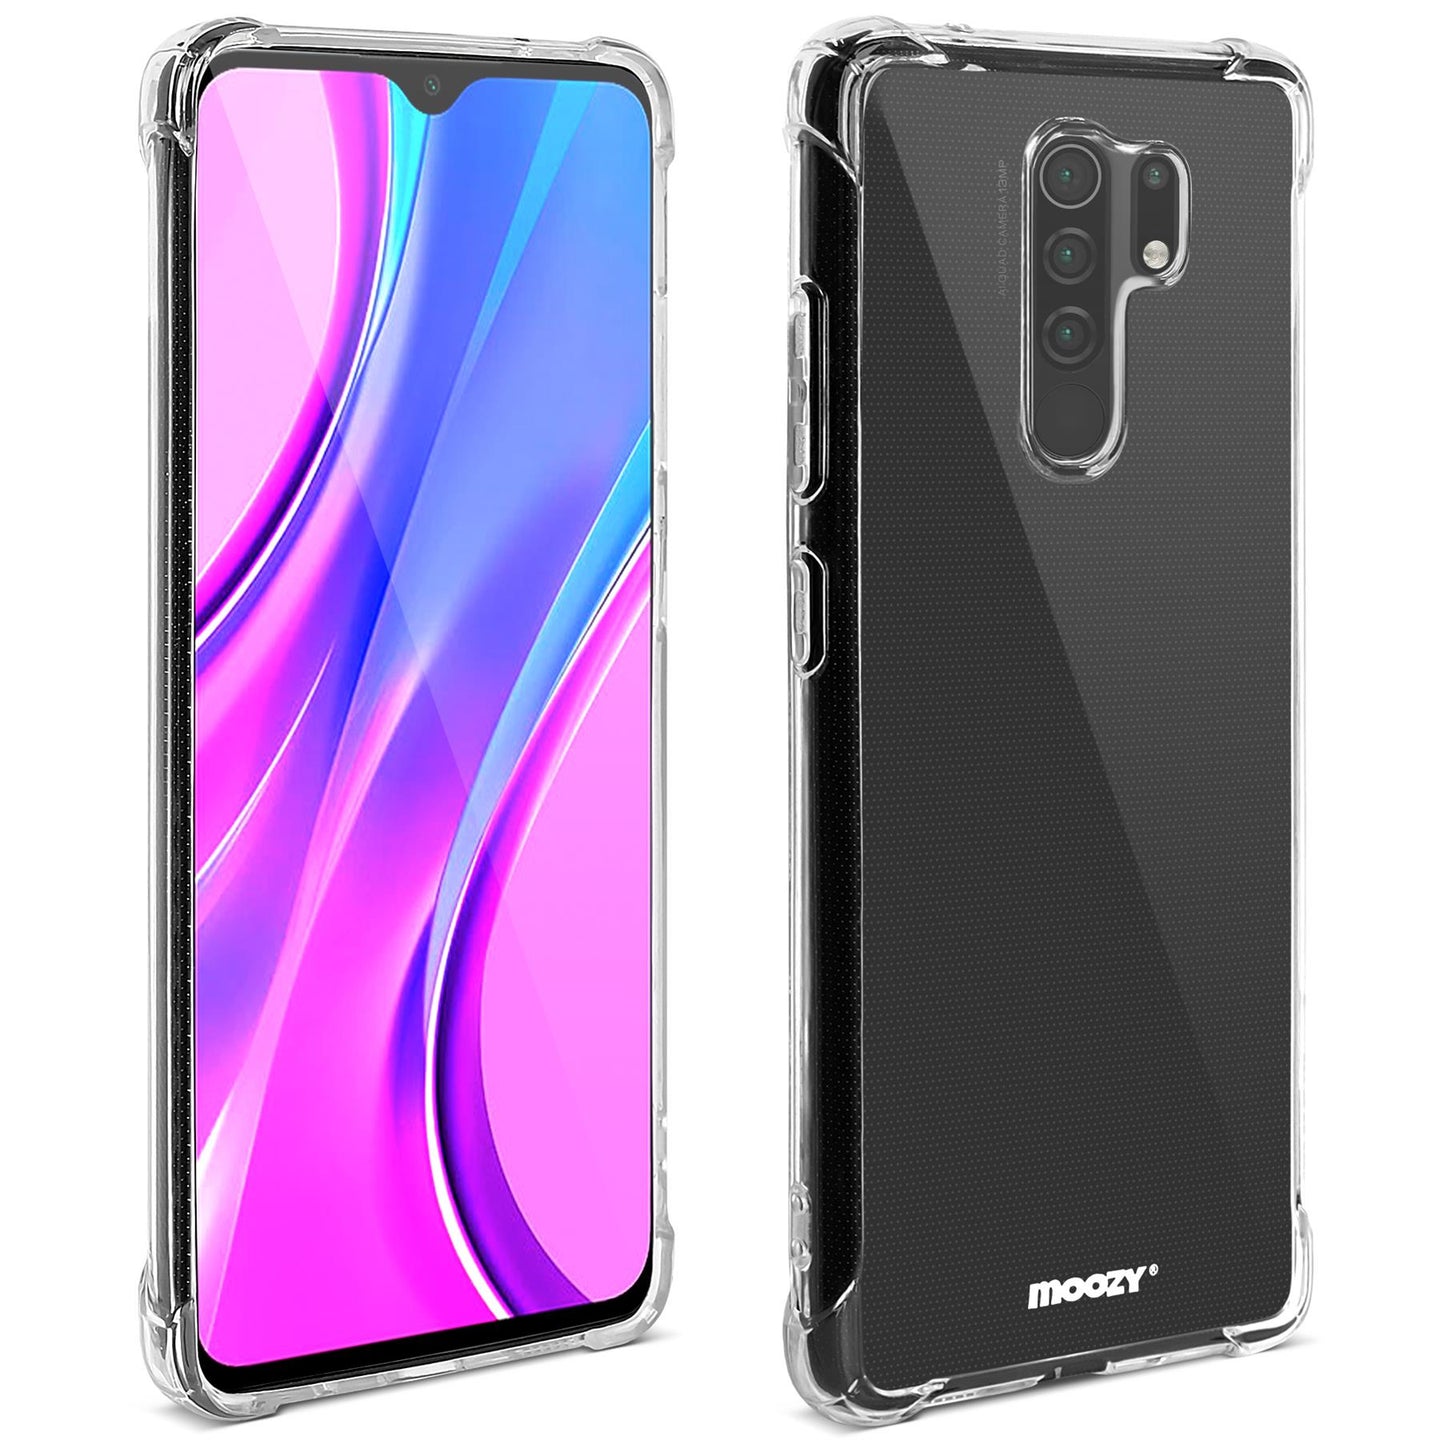 Moozy Shock Proof Silicone Case for Xiaomi Redmi 9 - Transparent Crystal Clear Phone Case Soft TPU Cover